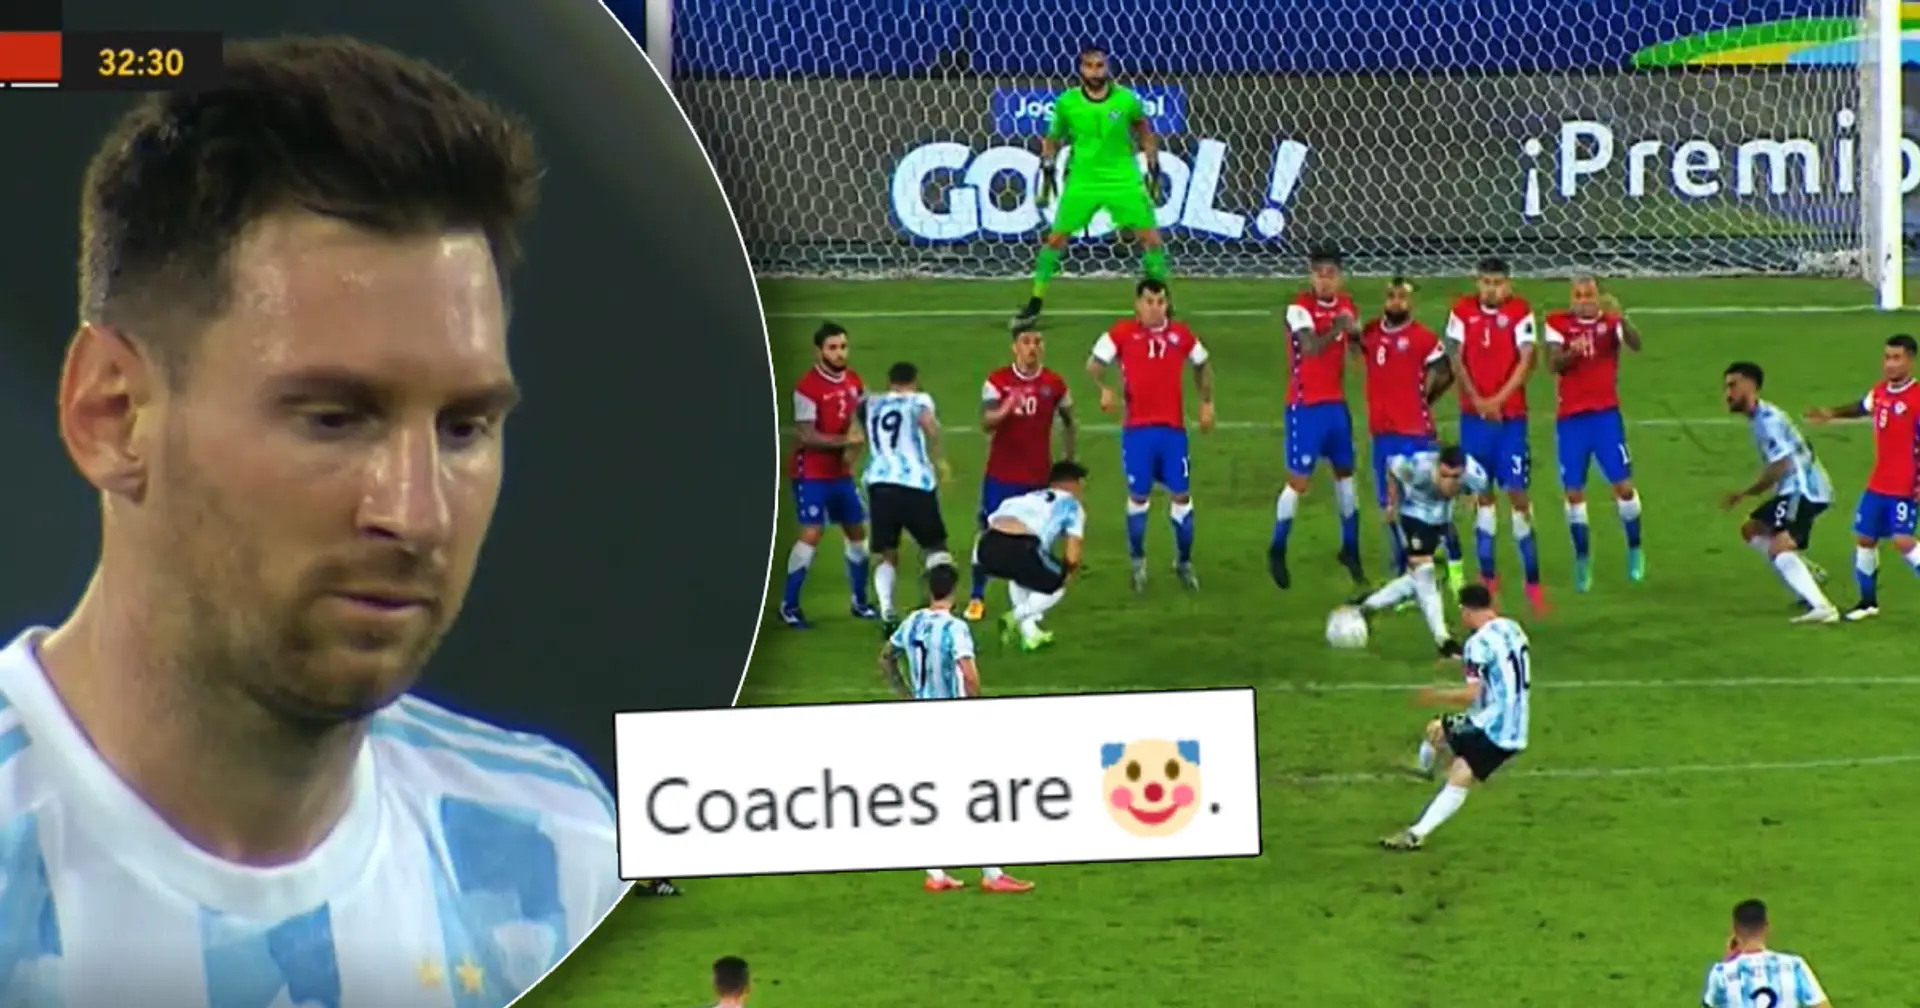 Chile puts up massive wall to defend Messi's free-kick – fan pokes big hole in it like Leo did